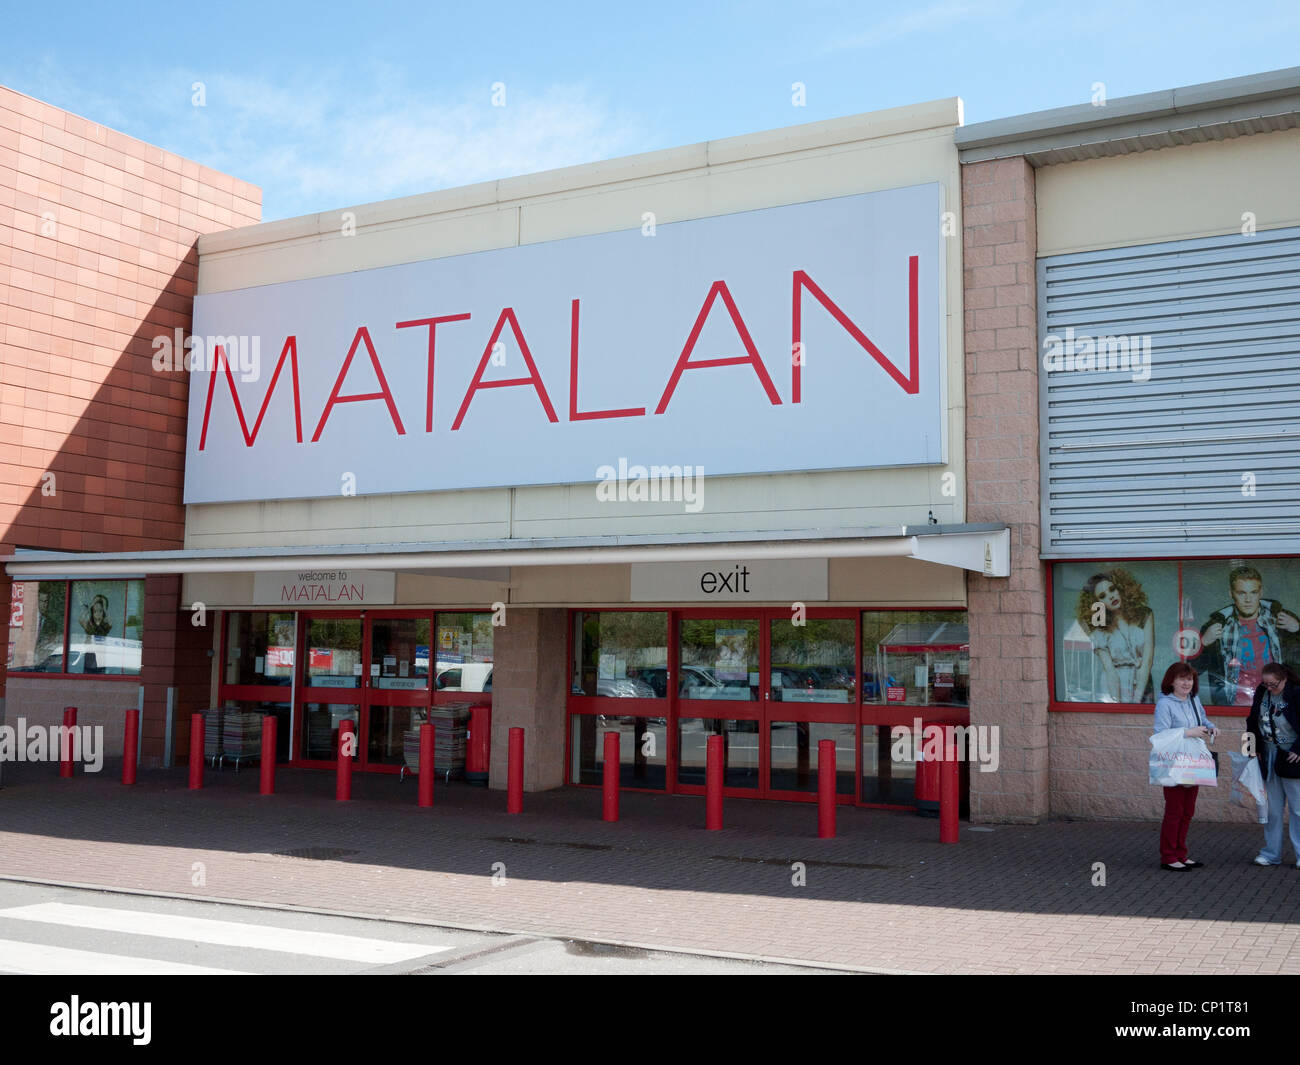 Magasin Matalan, Baguley, Manchester, Angleterre, Royaume-Uni. Banque D'Images